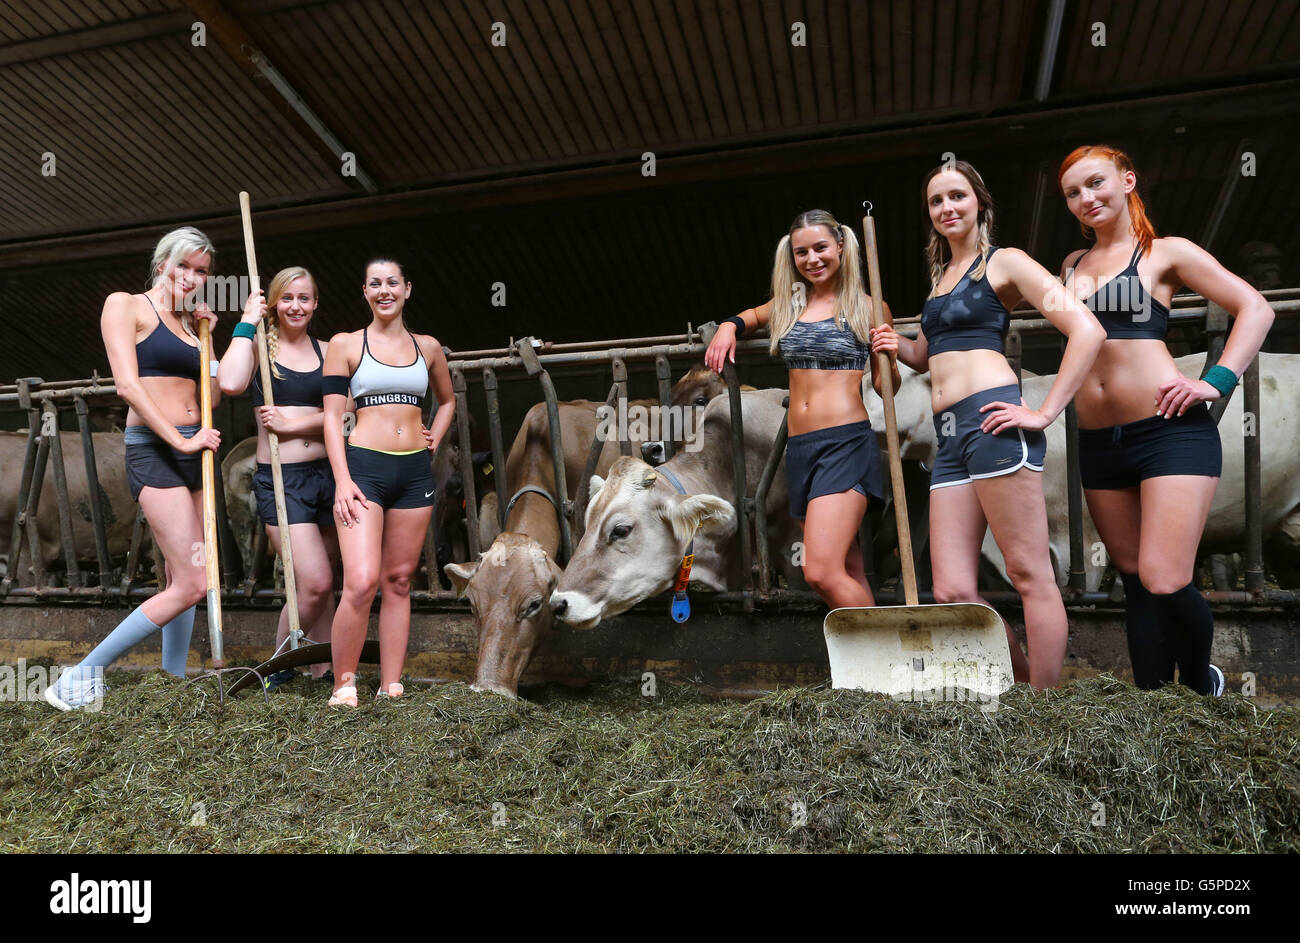 Apfeldorf, Germany. 22nd June, 2016. Farmers Caroline (L-R), Sofia, Elena, Viktoria, Daniel, a and Veronika pose in a cow stall for journalists on a tractor on a farm in Apfeldorf, Germany, 22 June 2016. A press event offers a view into the production of the 2017 Young Farmers calendar, the theme of which is 'crossfit on the farm.' Photo: Karl-Josef Hildenbrand /dpa/Alamy Live News Stock Photo